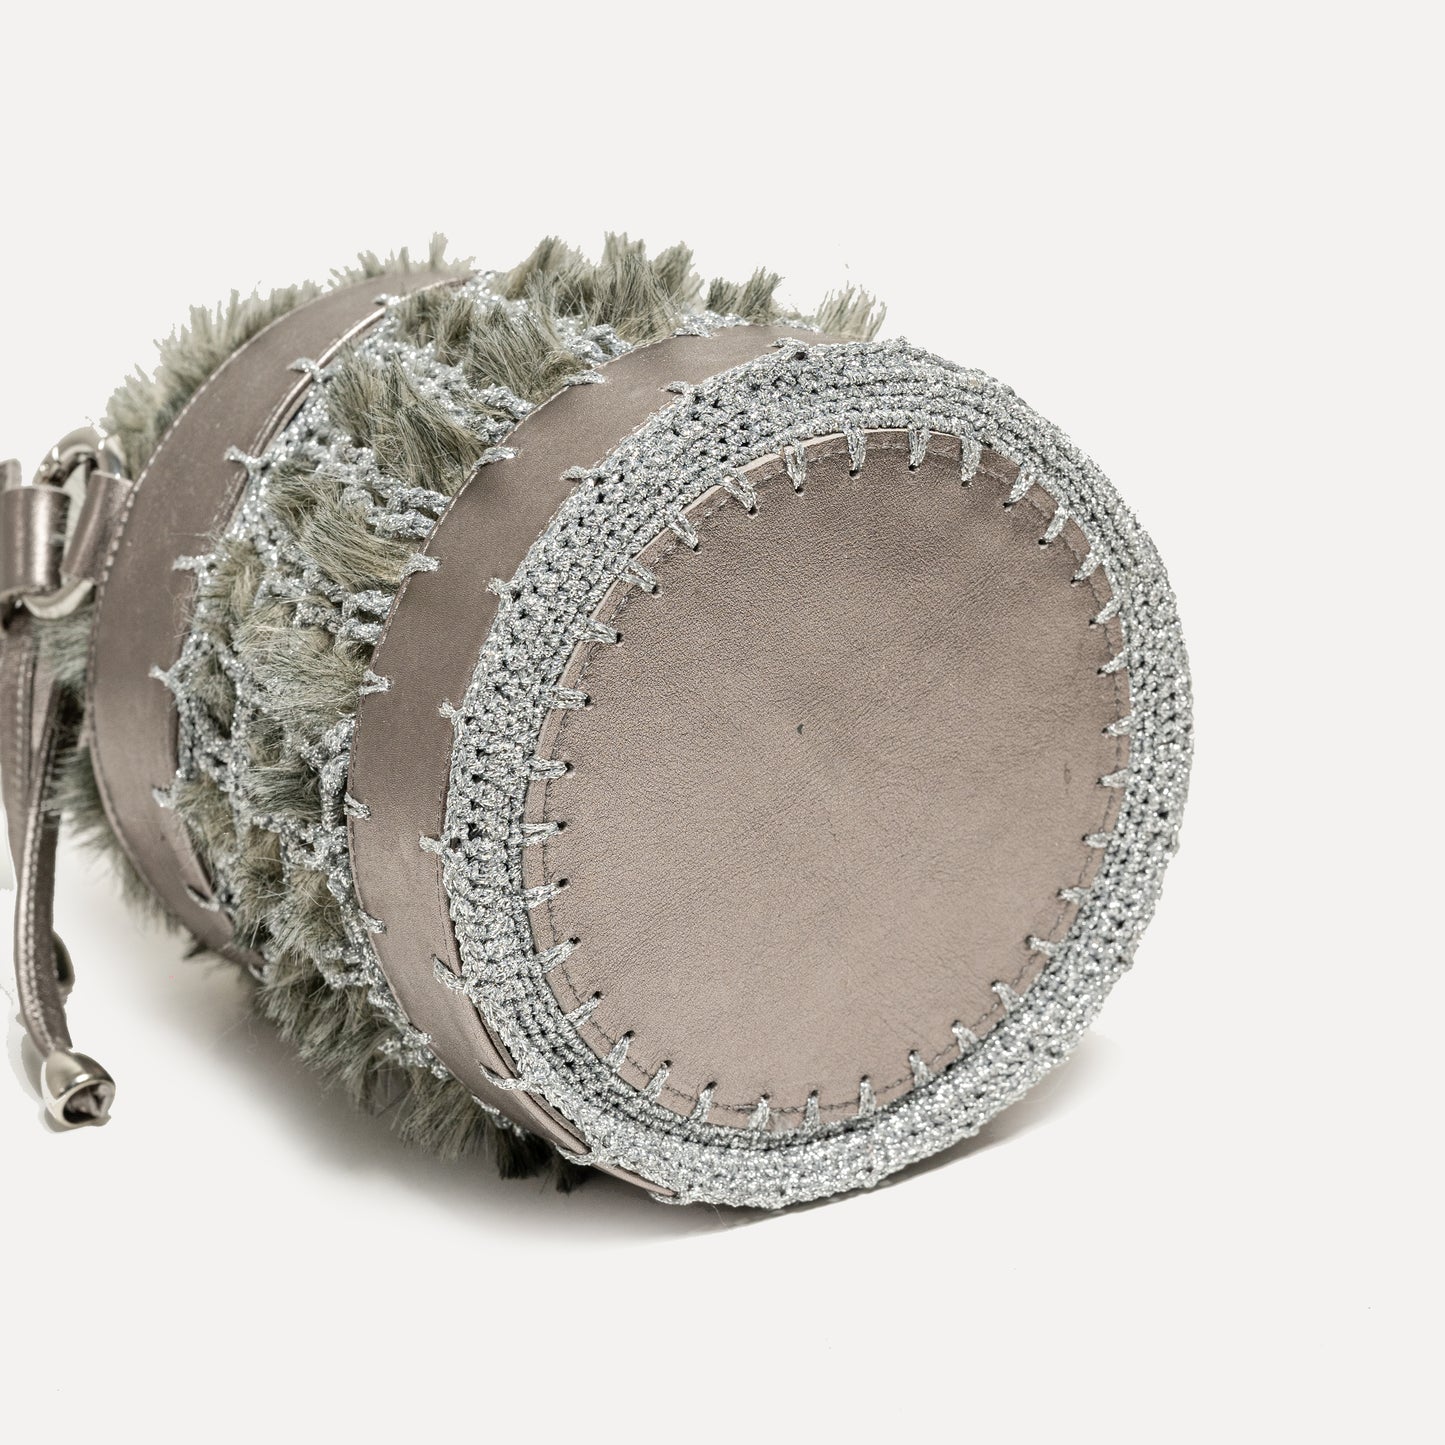 Covelinhas - bag in leather and crochet in bronze and gray faux fur